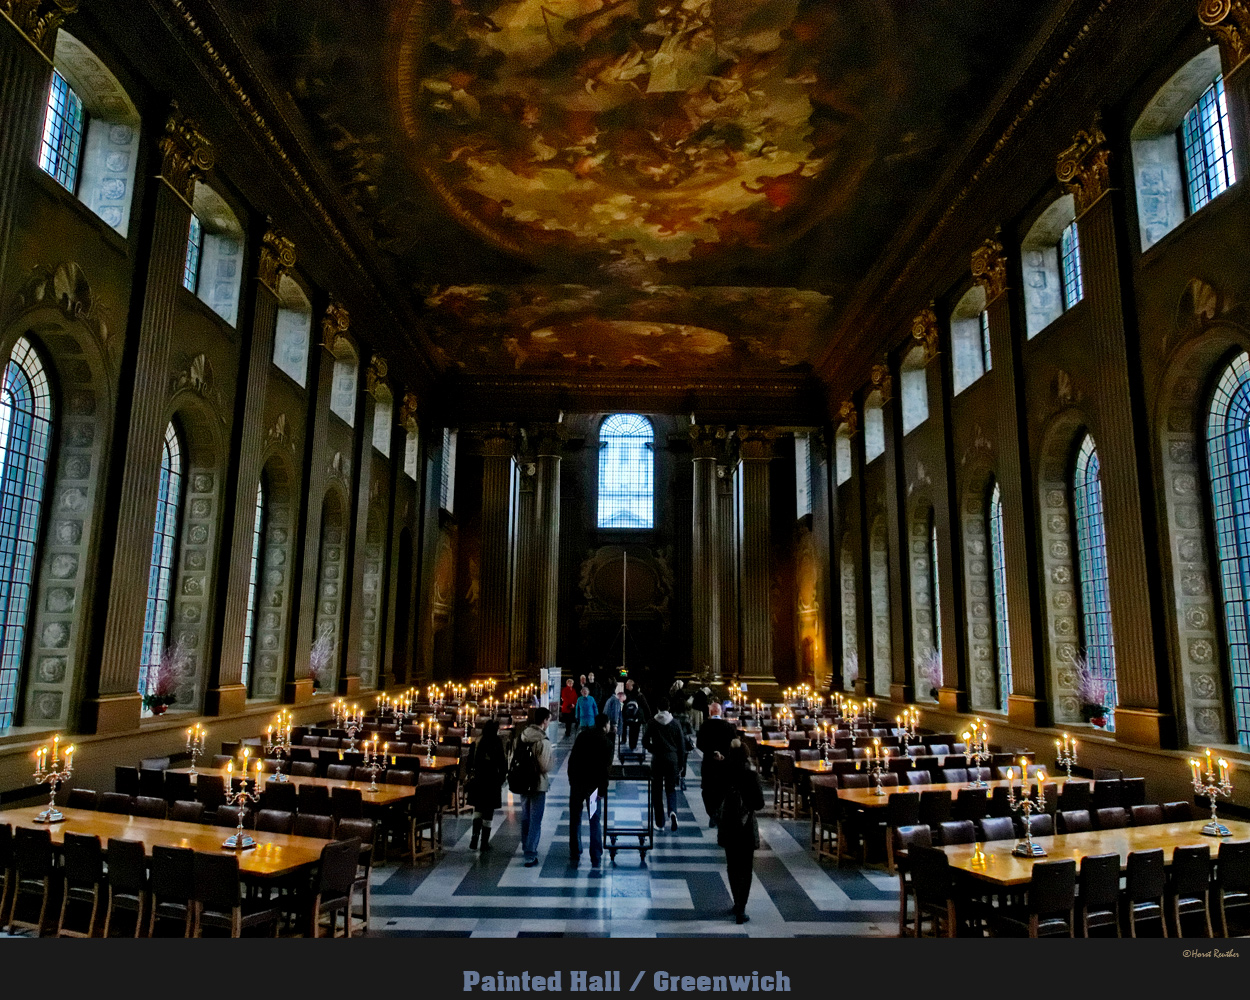 Painted Hall in Greenwich / England